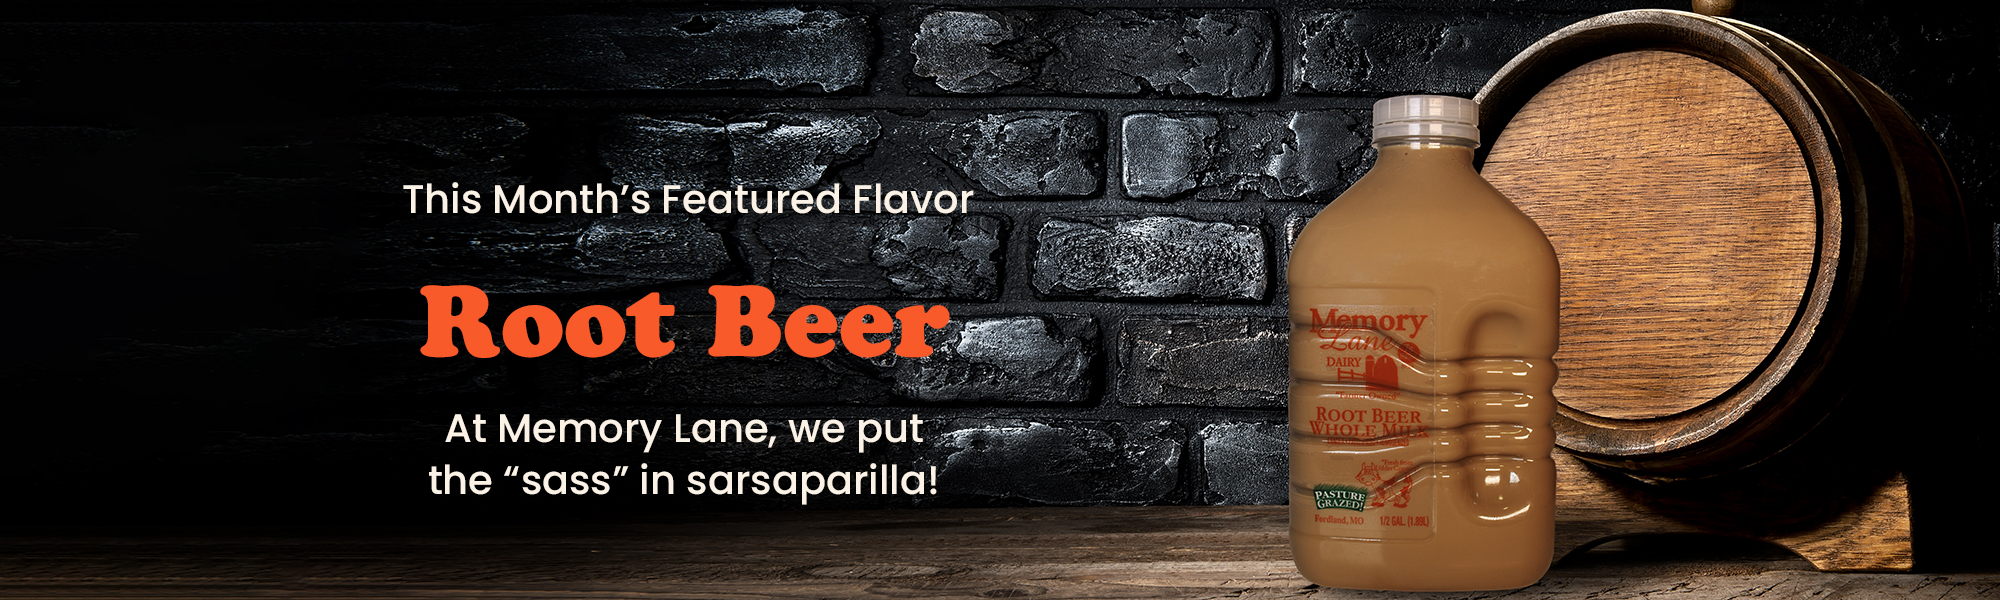 This Month's Featured Flavor Root Beer At Memory Lane, we put the "sass" in sarsaparilla!